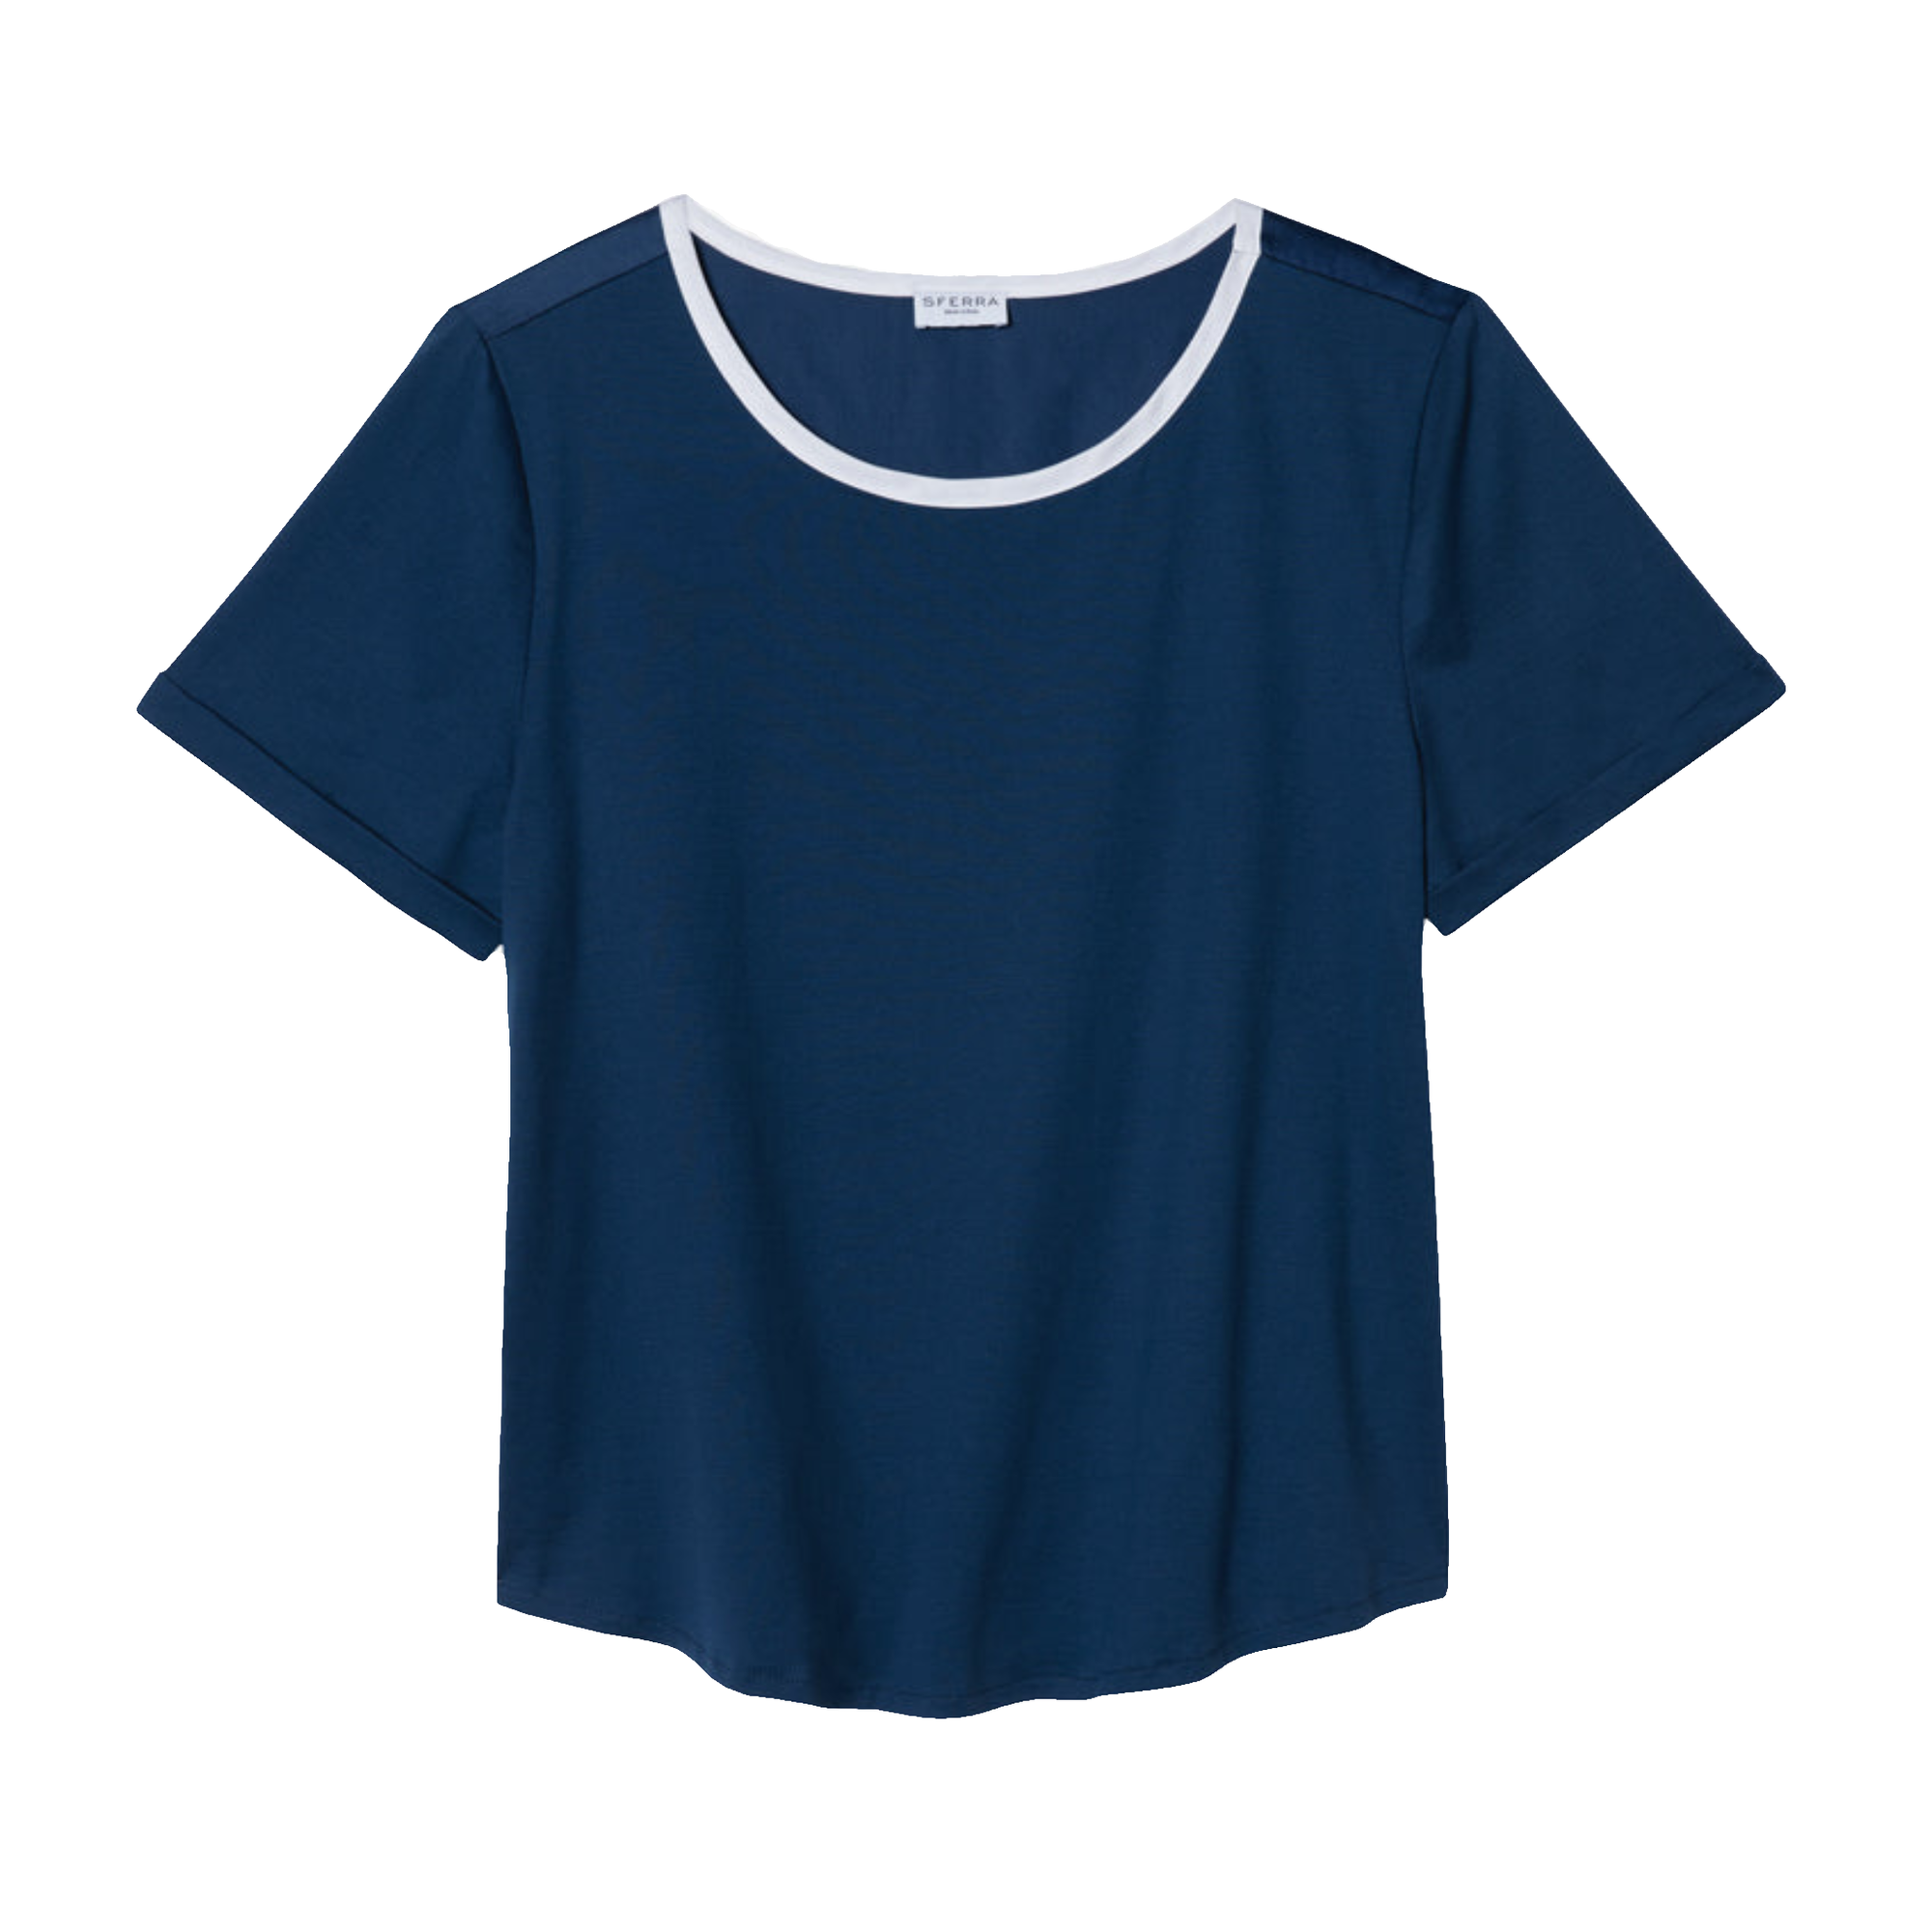 Navy Sferra Caricia Short Sleeve Top against white background